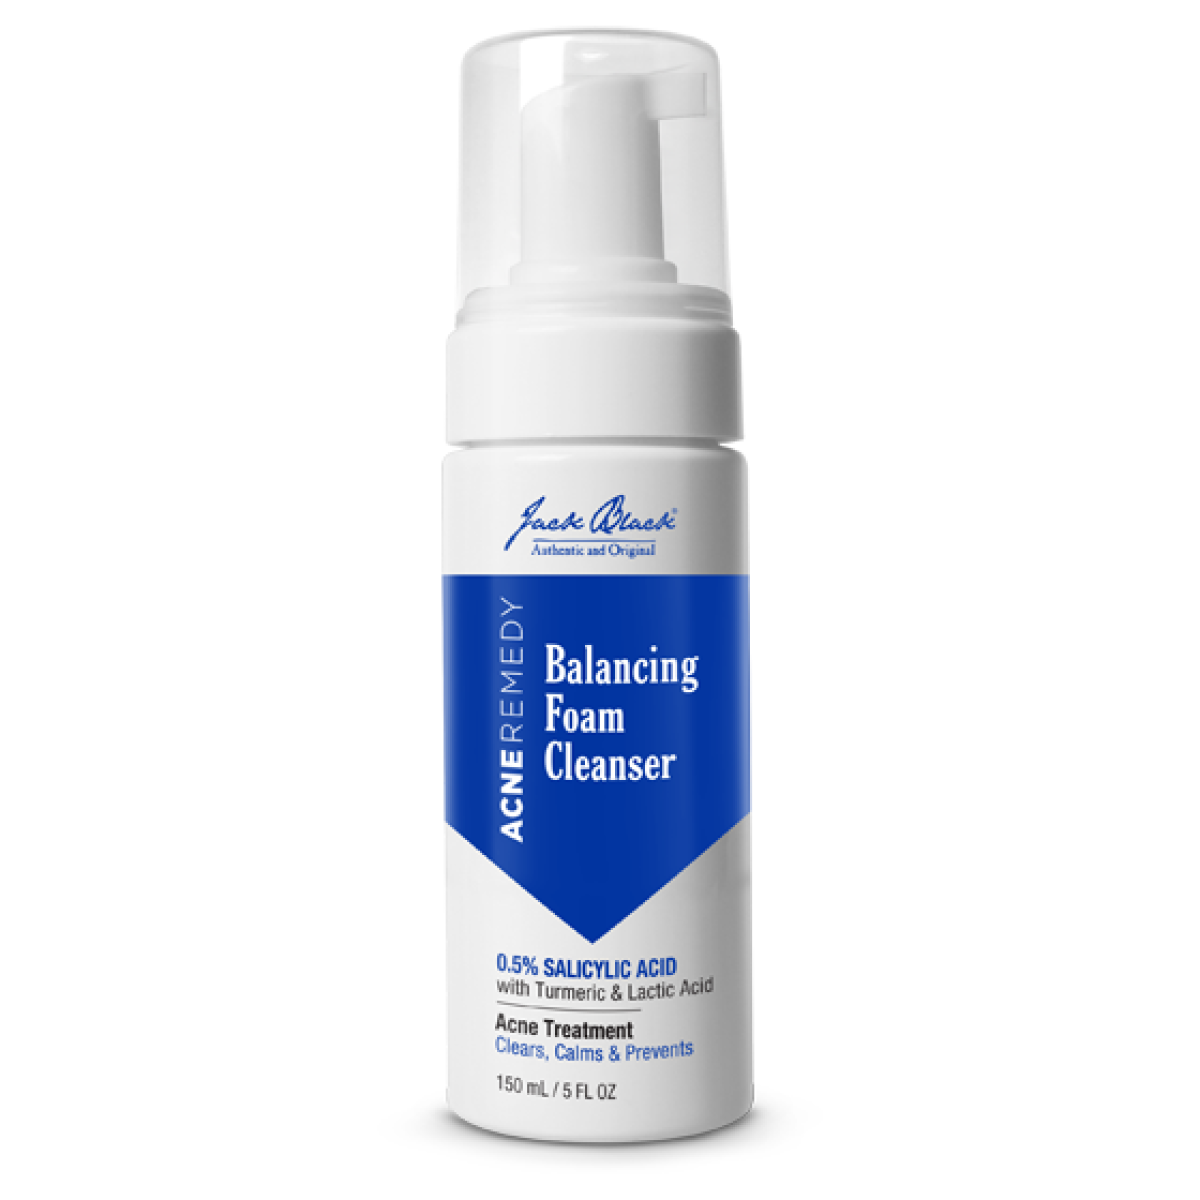 Primary Image of Balancing Foam Cleanser Acne Remedy